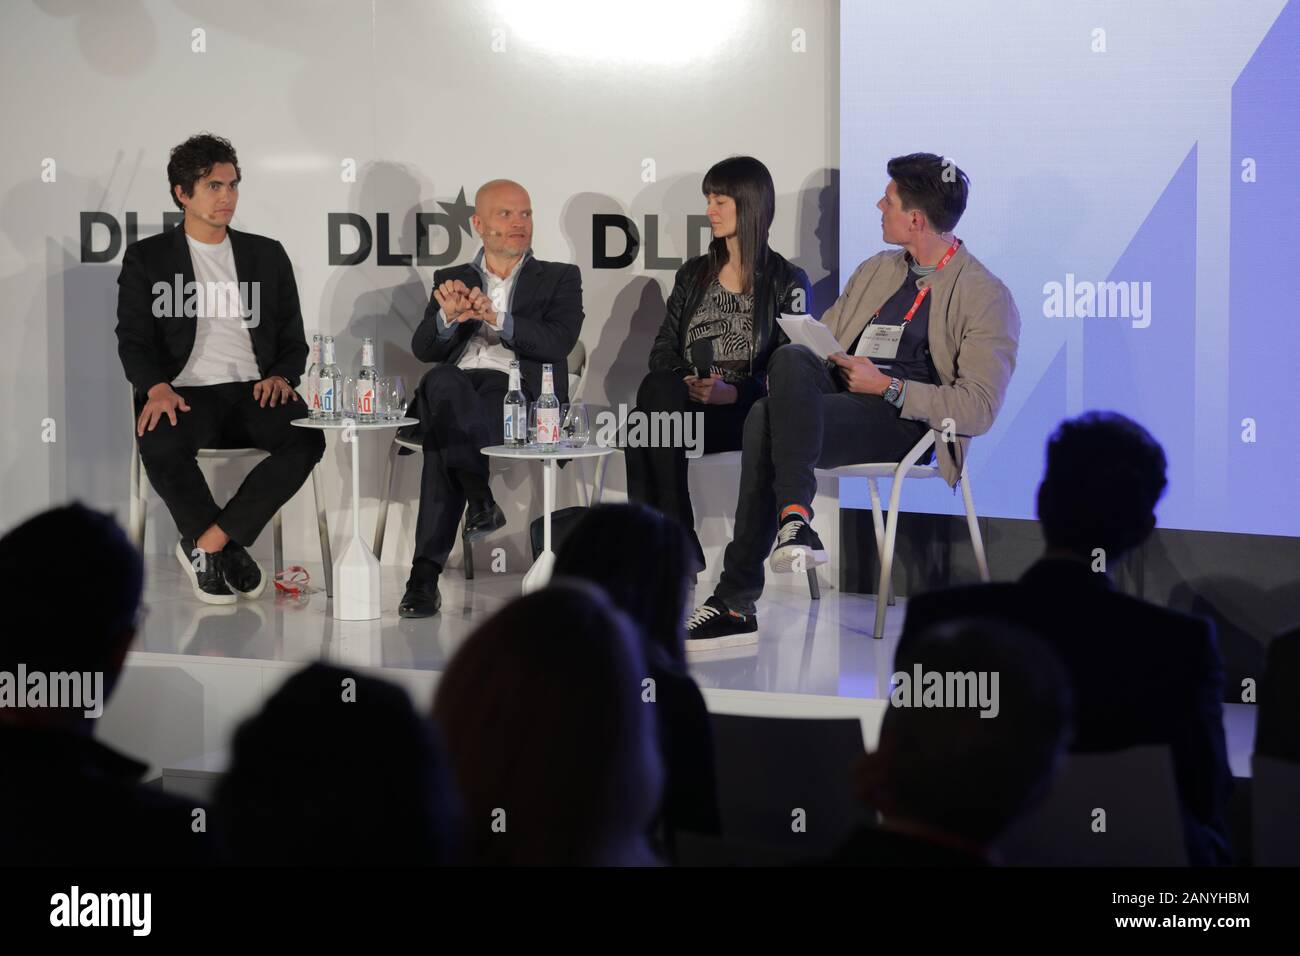 Munich, Bavaria. 19th Jan, 2020. (l-r) Chase Lochmiller (Co-founder & CEO Crusoe Energy Systems), John Pfeffer (Founder Pfeffer Capital LP), Elizabeth Stark (CEO and Co-Founder of Lightning Labs) and Alexander Liegl (Co-Founder and CEO Layer1) discuss during a panel at DLD Munich Conference 2020, Europe's big innovation conference, Alte Kongresshalle, Munich, January 18-20, 2020 Picture Alliance for DLD/Hubert Burda Media | usage worldwide Credit: dpa/Alamy Live News Stock Photo